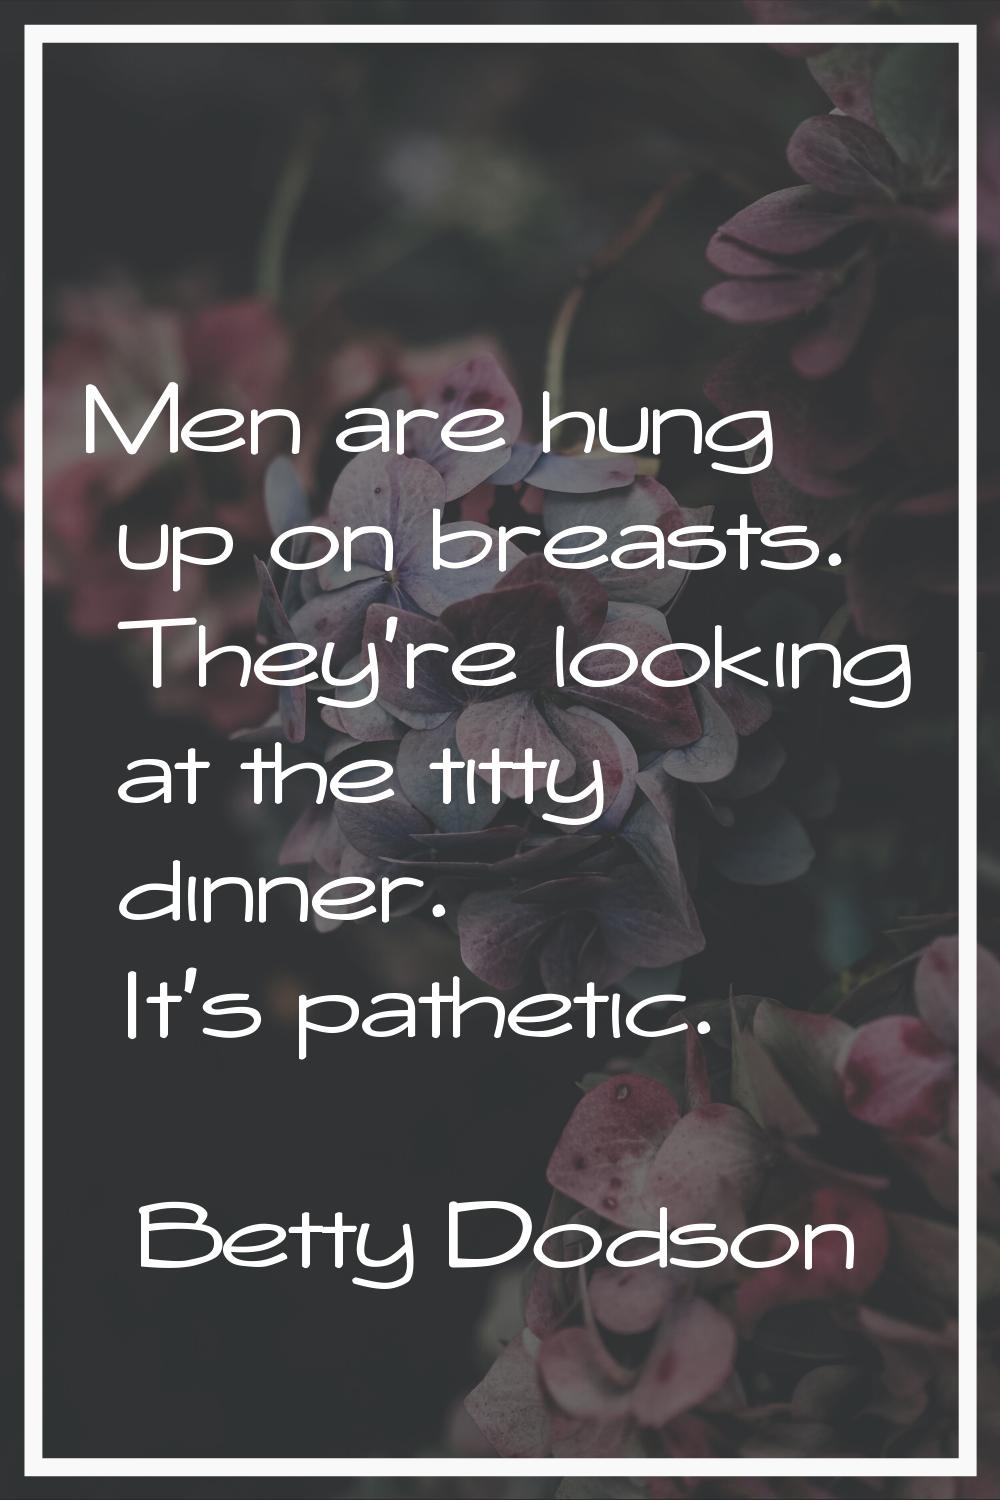 Men are hung up on breasts. They're looking at the titty dinner. It's pathetic.